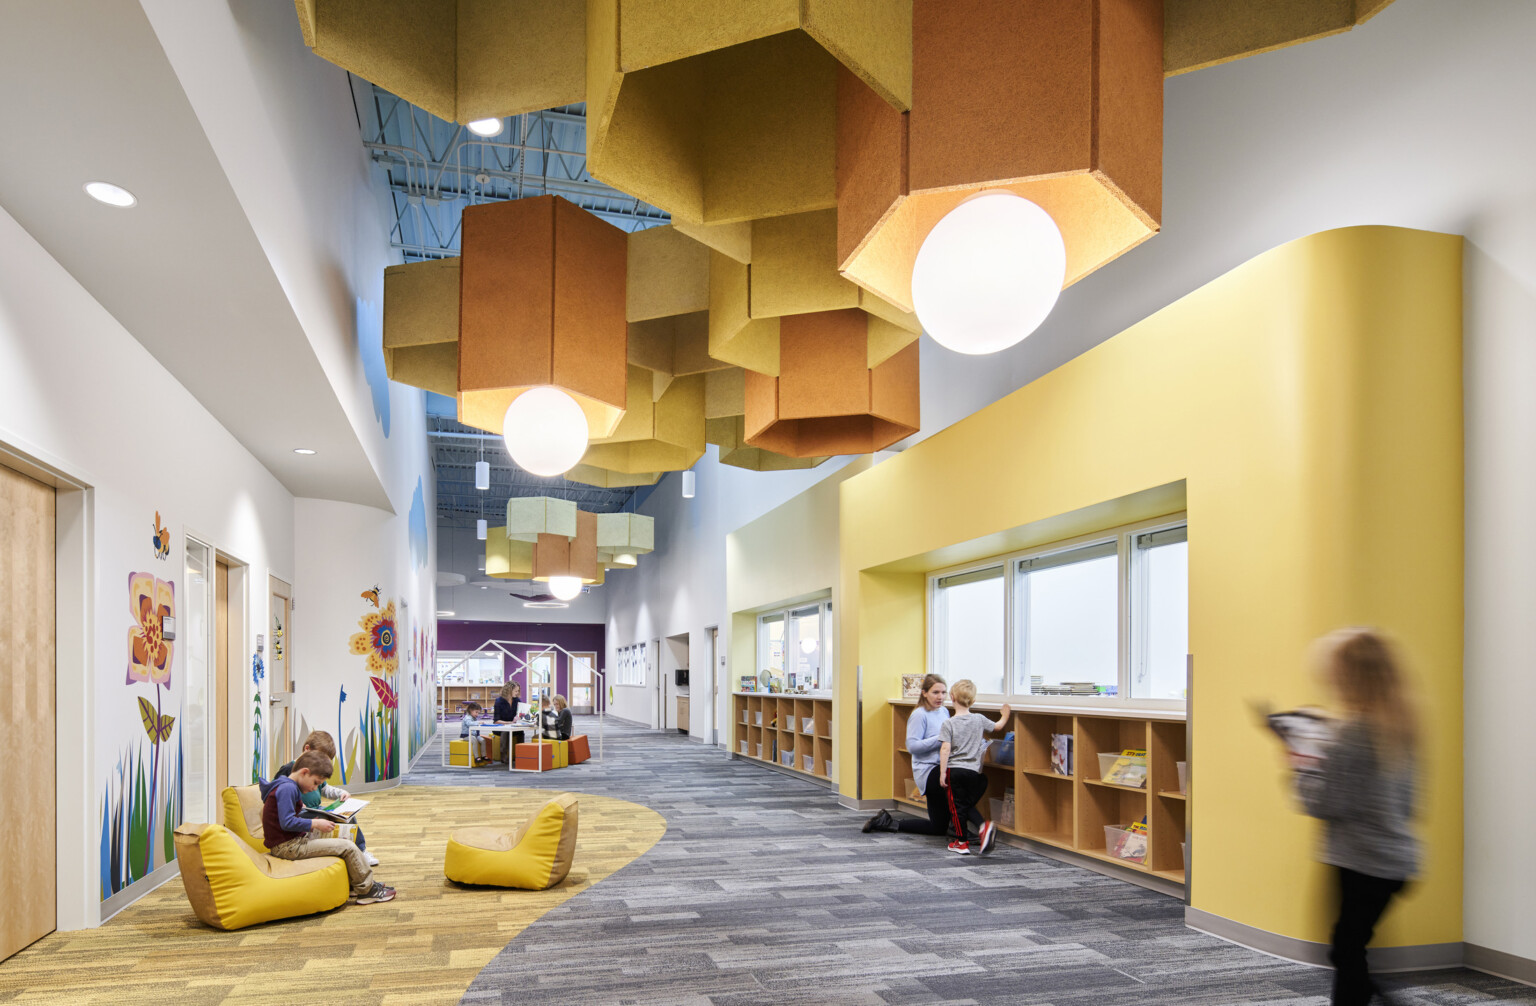 Hallway with comfortable soft seating, yellow wall and carpet accents. Yellow pentagonal baffles and globe pendant lights